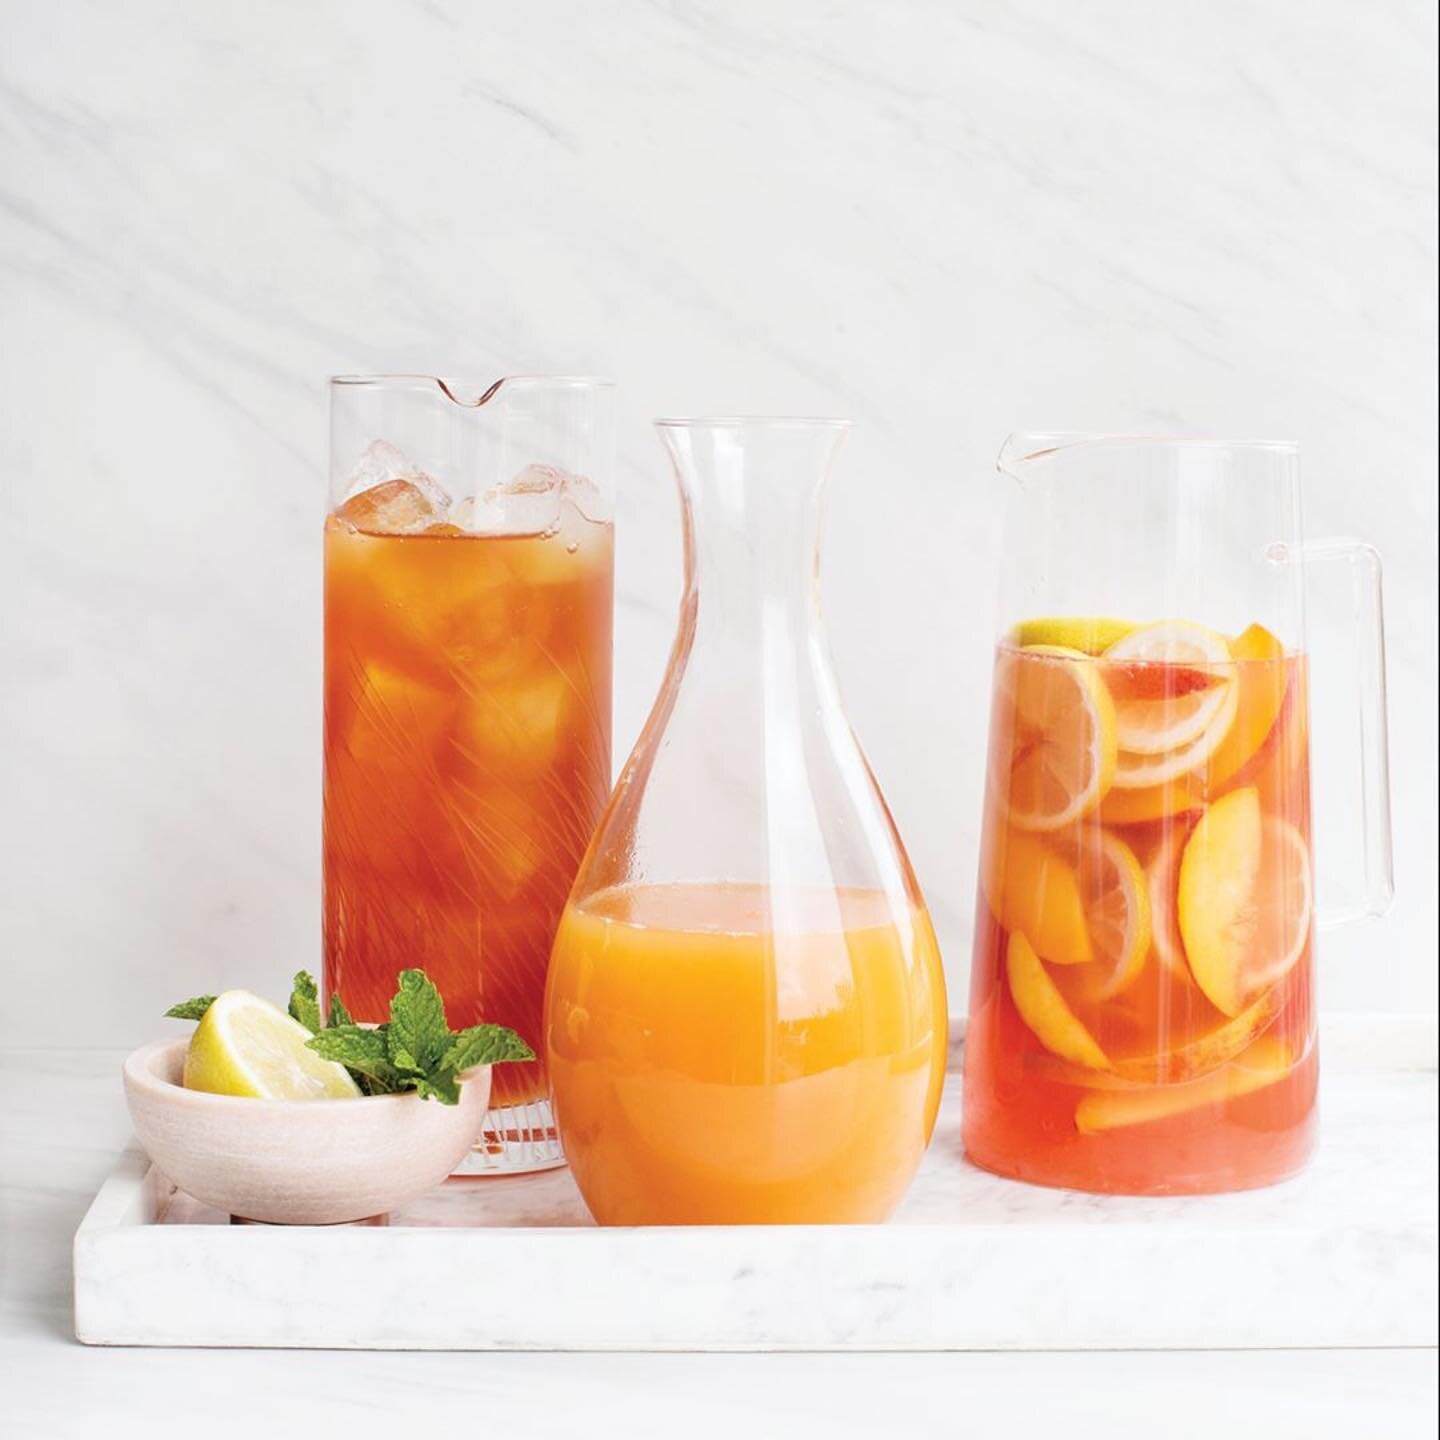 We love this recipe from Music City based The Peach Truck! Mountain Valley Sparkling Water and Peaches are the perfect summer combination. Check out the Recipe in our Bio. 📷 @mountainvalleywater ・・・
Feeling Peachy, and looking for a summertime refre